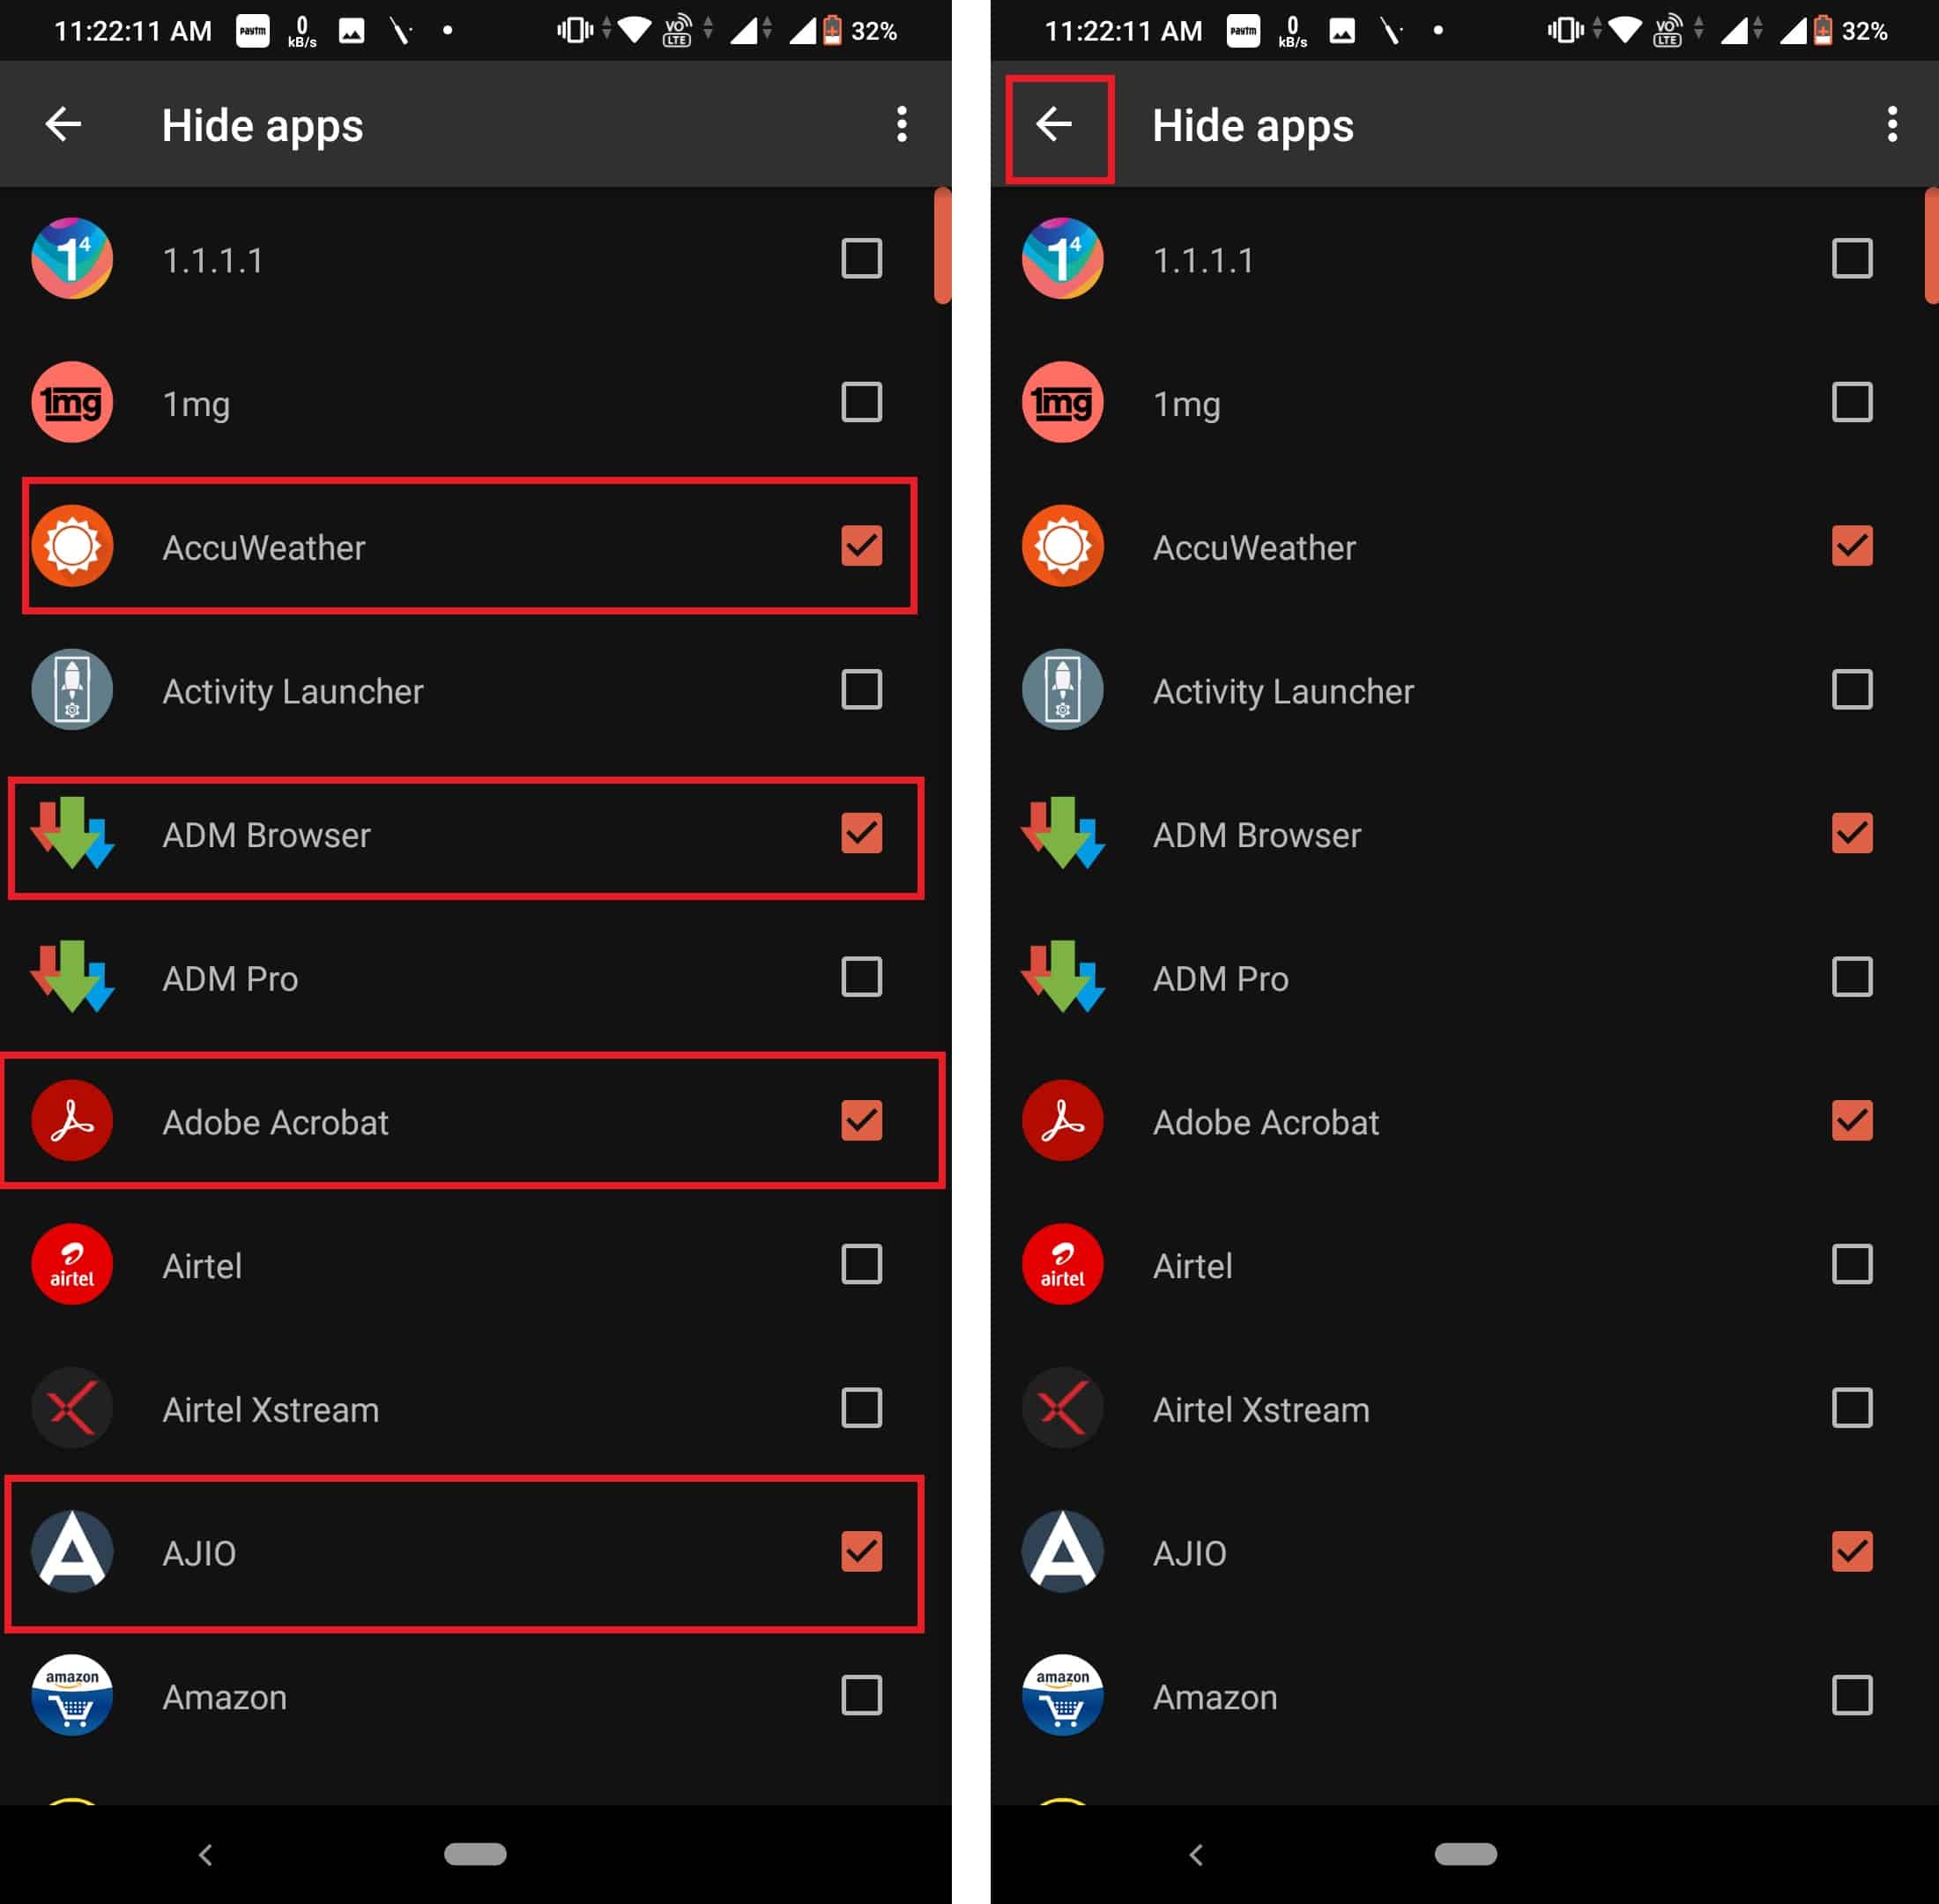 Hide apps on any android device using Nova Launcher Prime